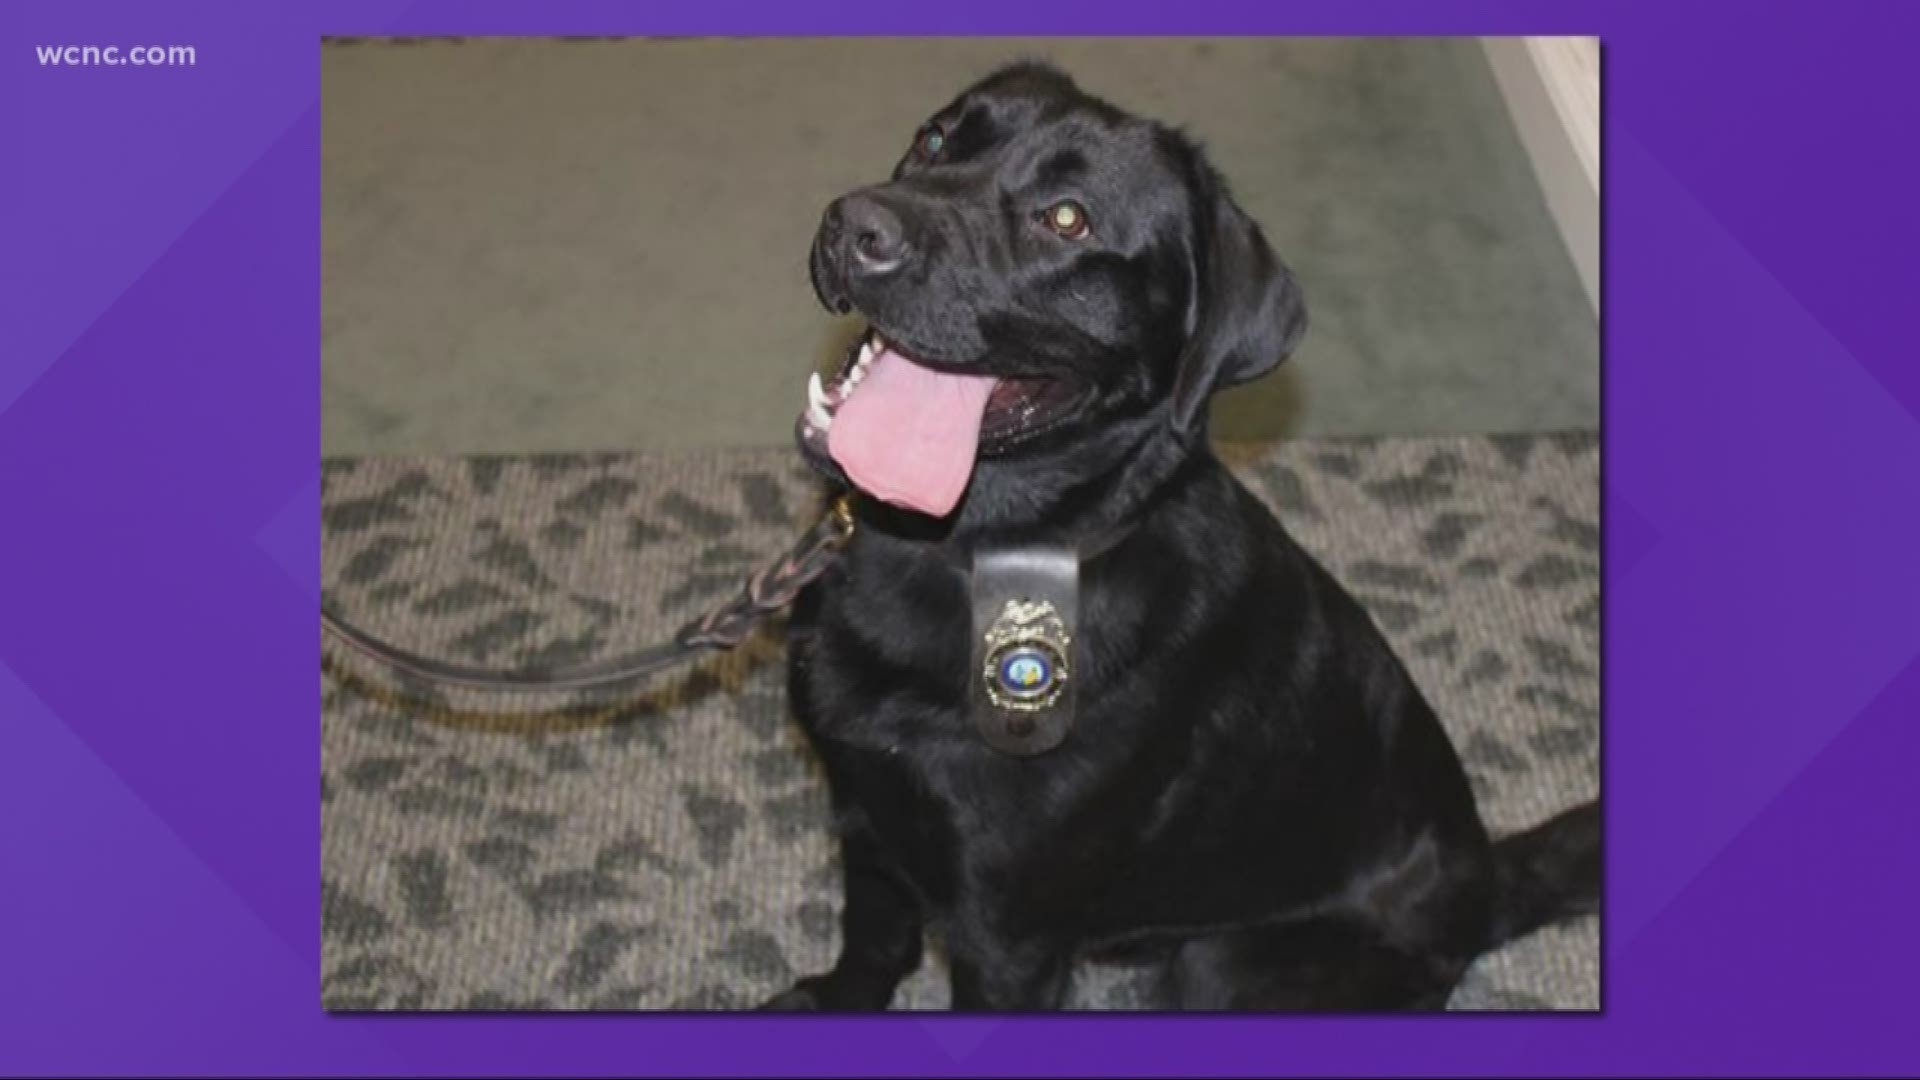 Benny is a 15-month-old labrador. His first day was last Wednesday, and he already has two narcotics arrests under his belt.